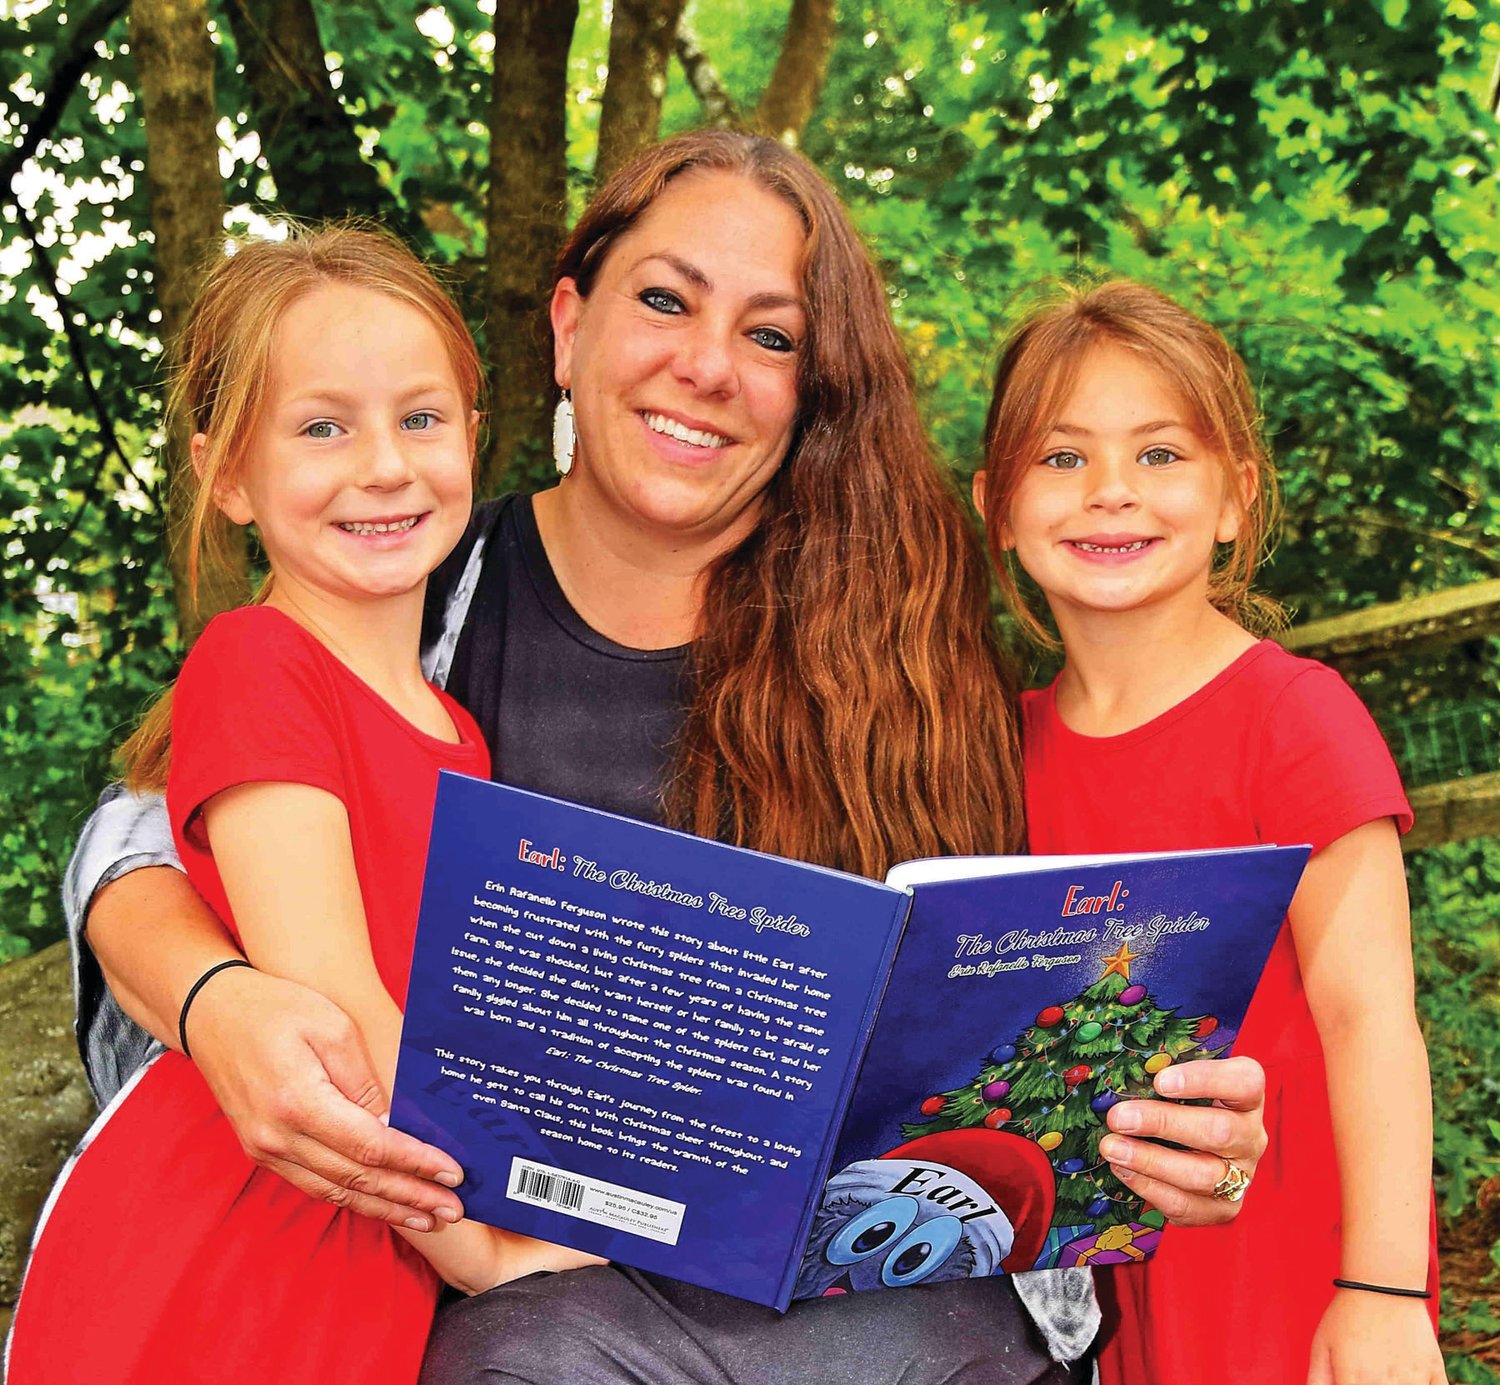 Author Erin Rafanello Ferguson reading from her book “Earl: The Christmas Tree Spider” to her children, Sawyer and Harlan Ferguson.